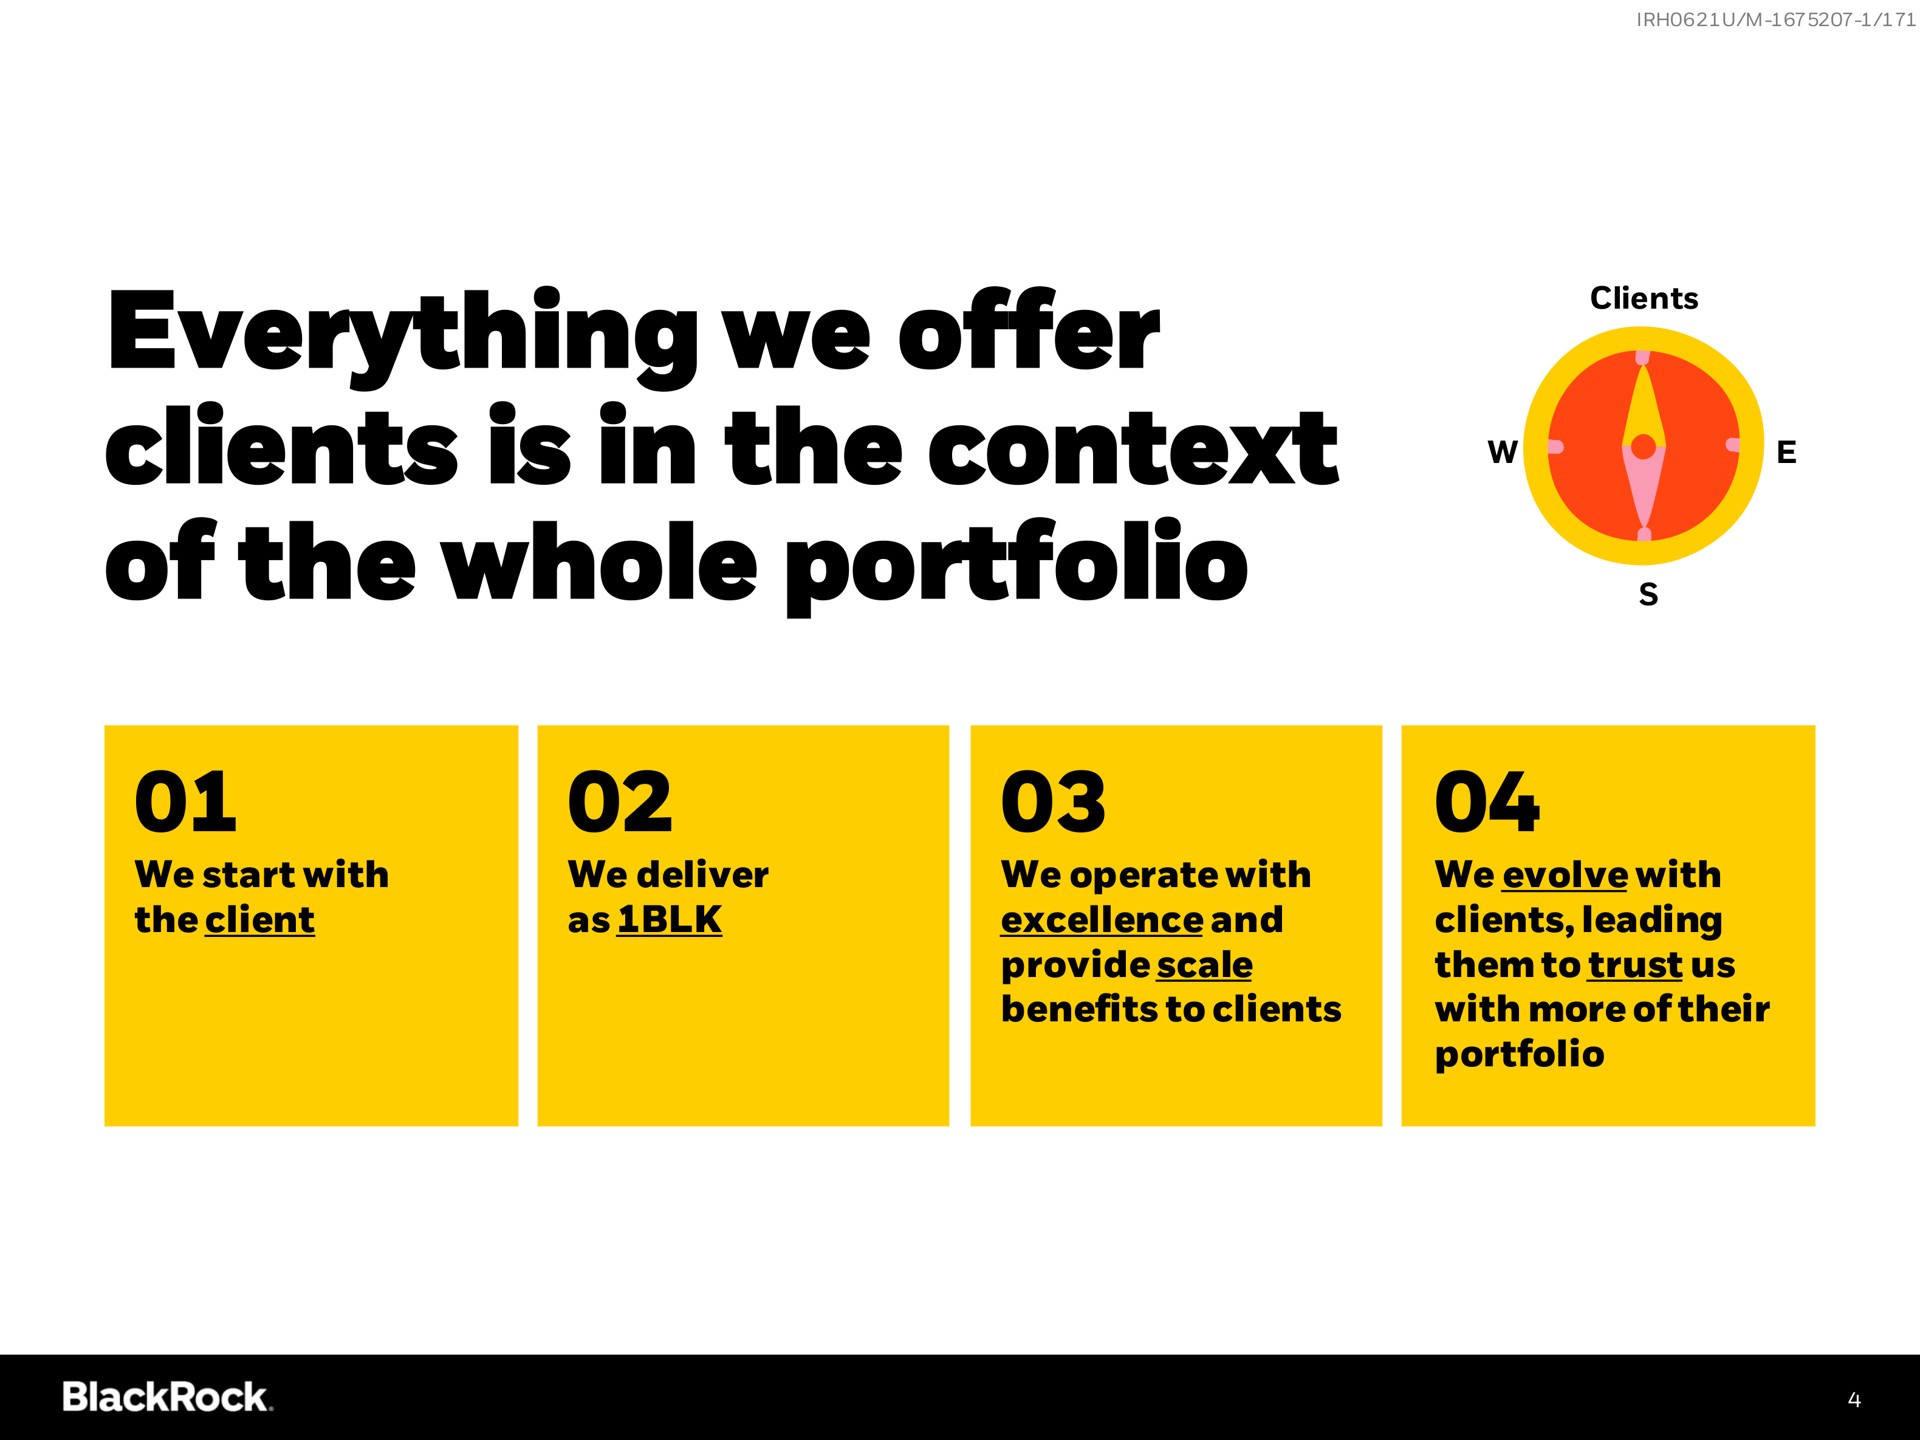 everything we offer clients is in the context of the whole portfolio | BlackRock